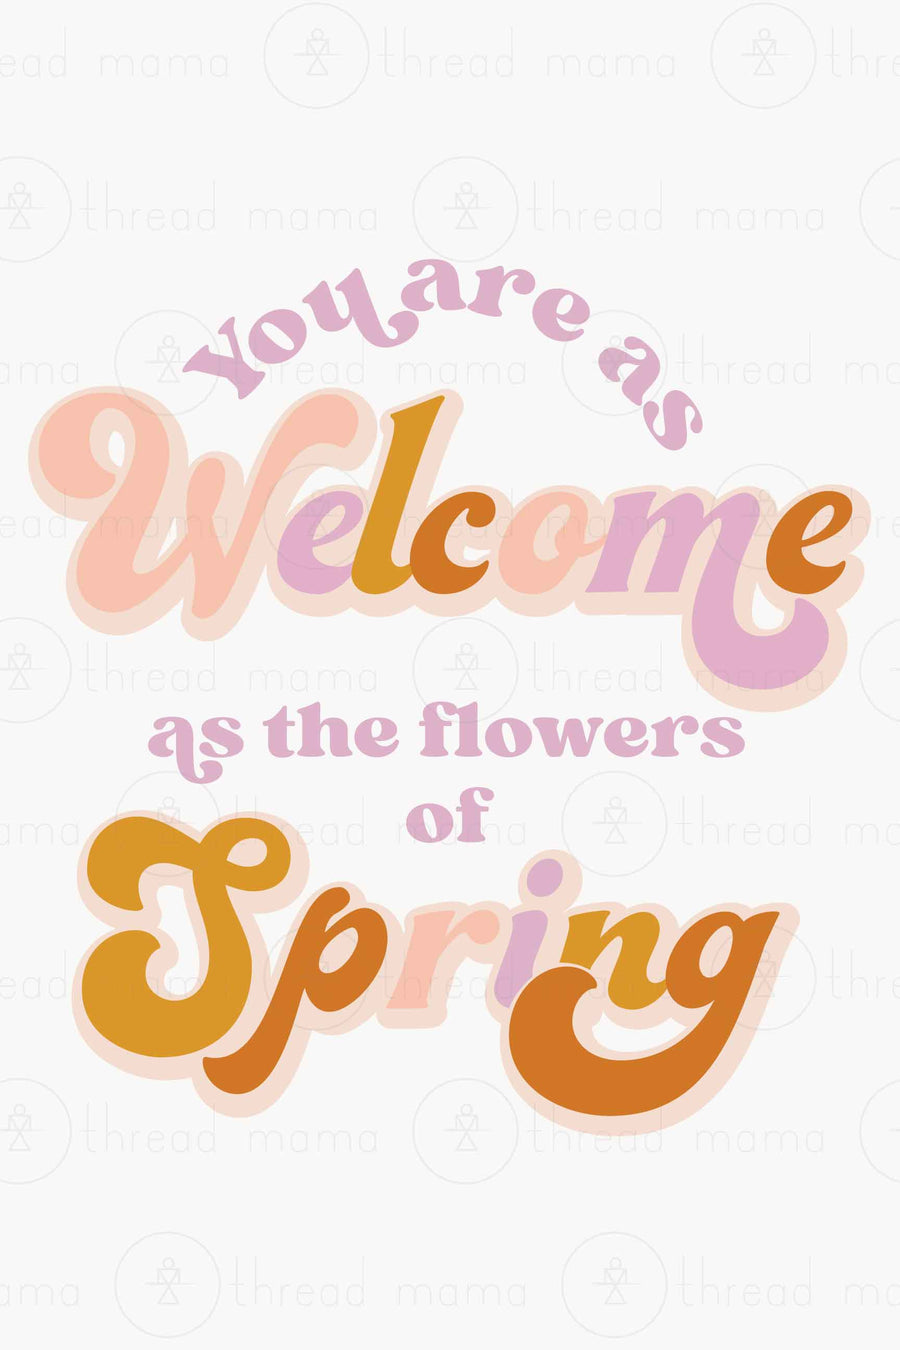 You are as welcome as the flowers of spring (Printable Poster)